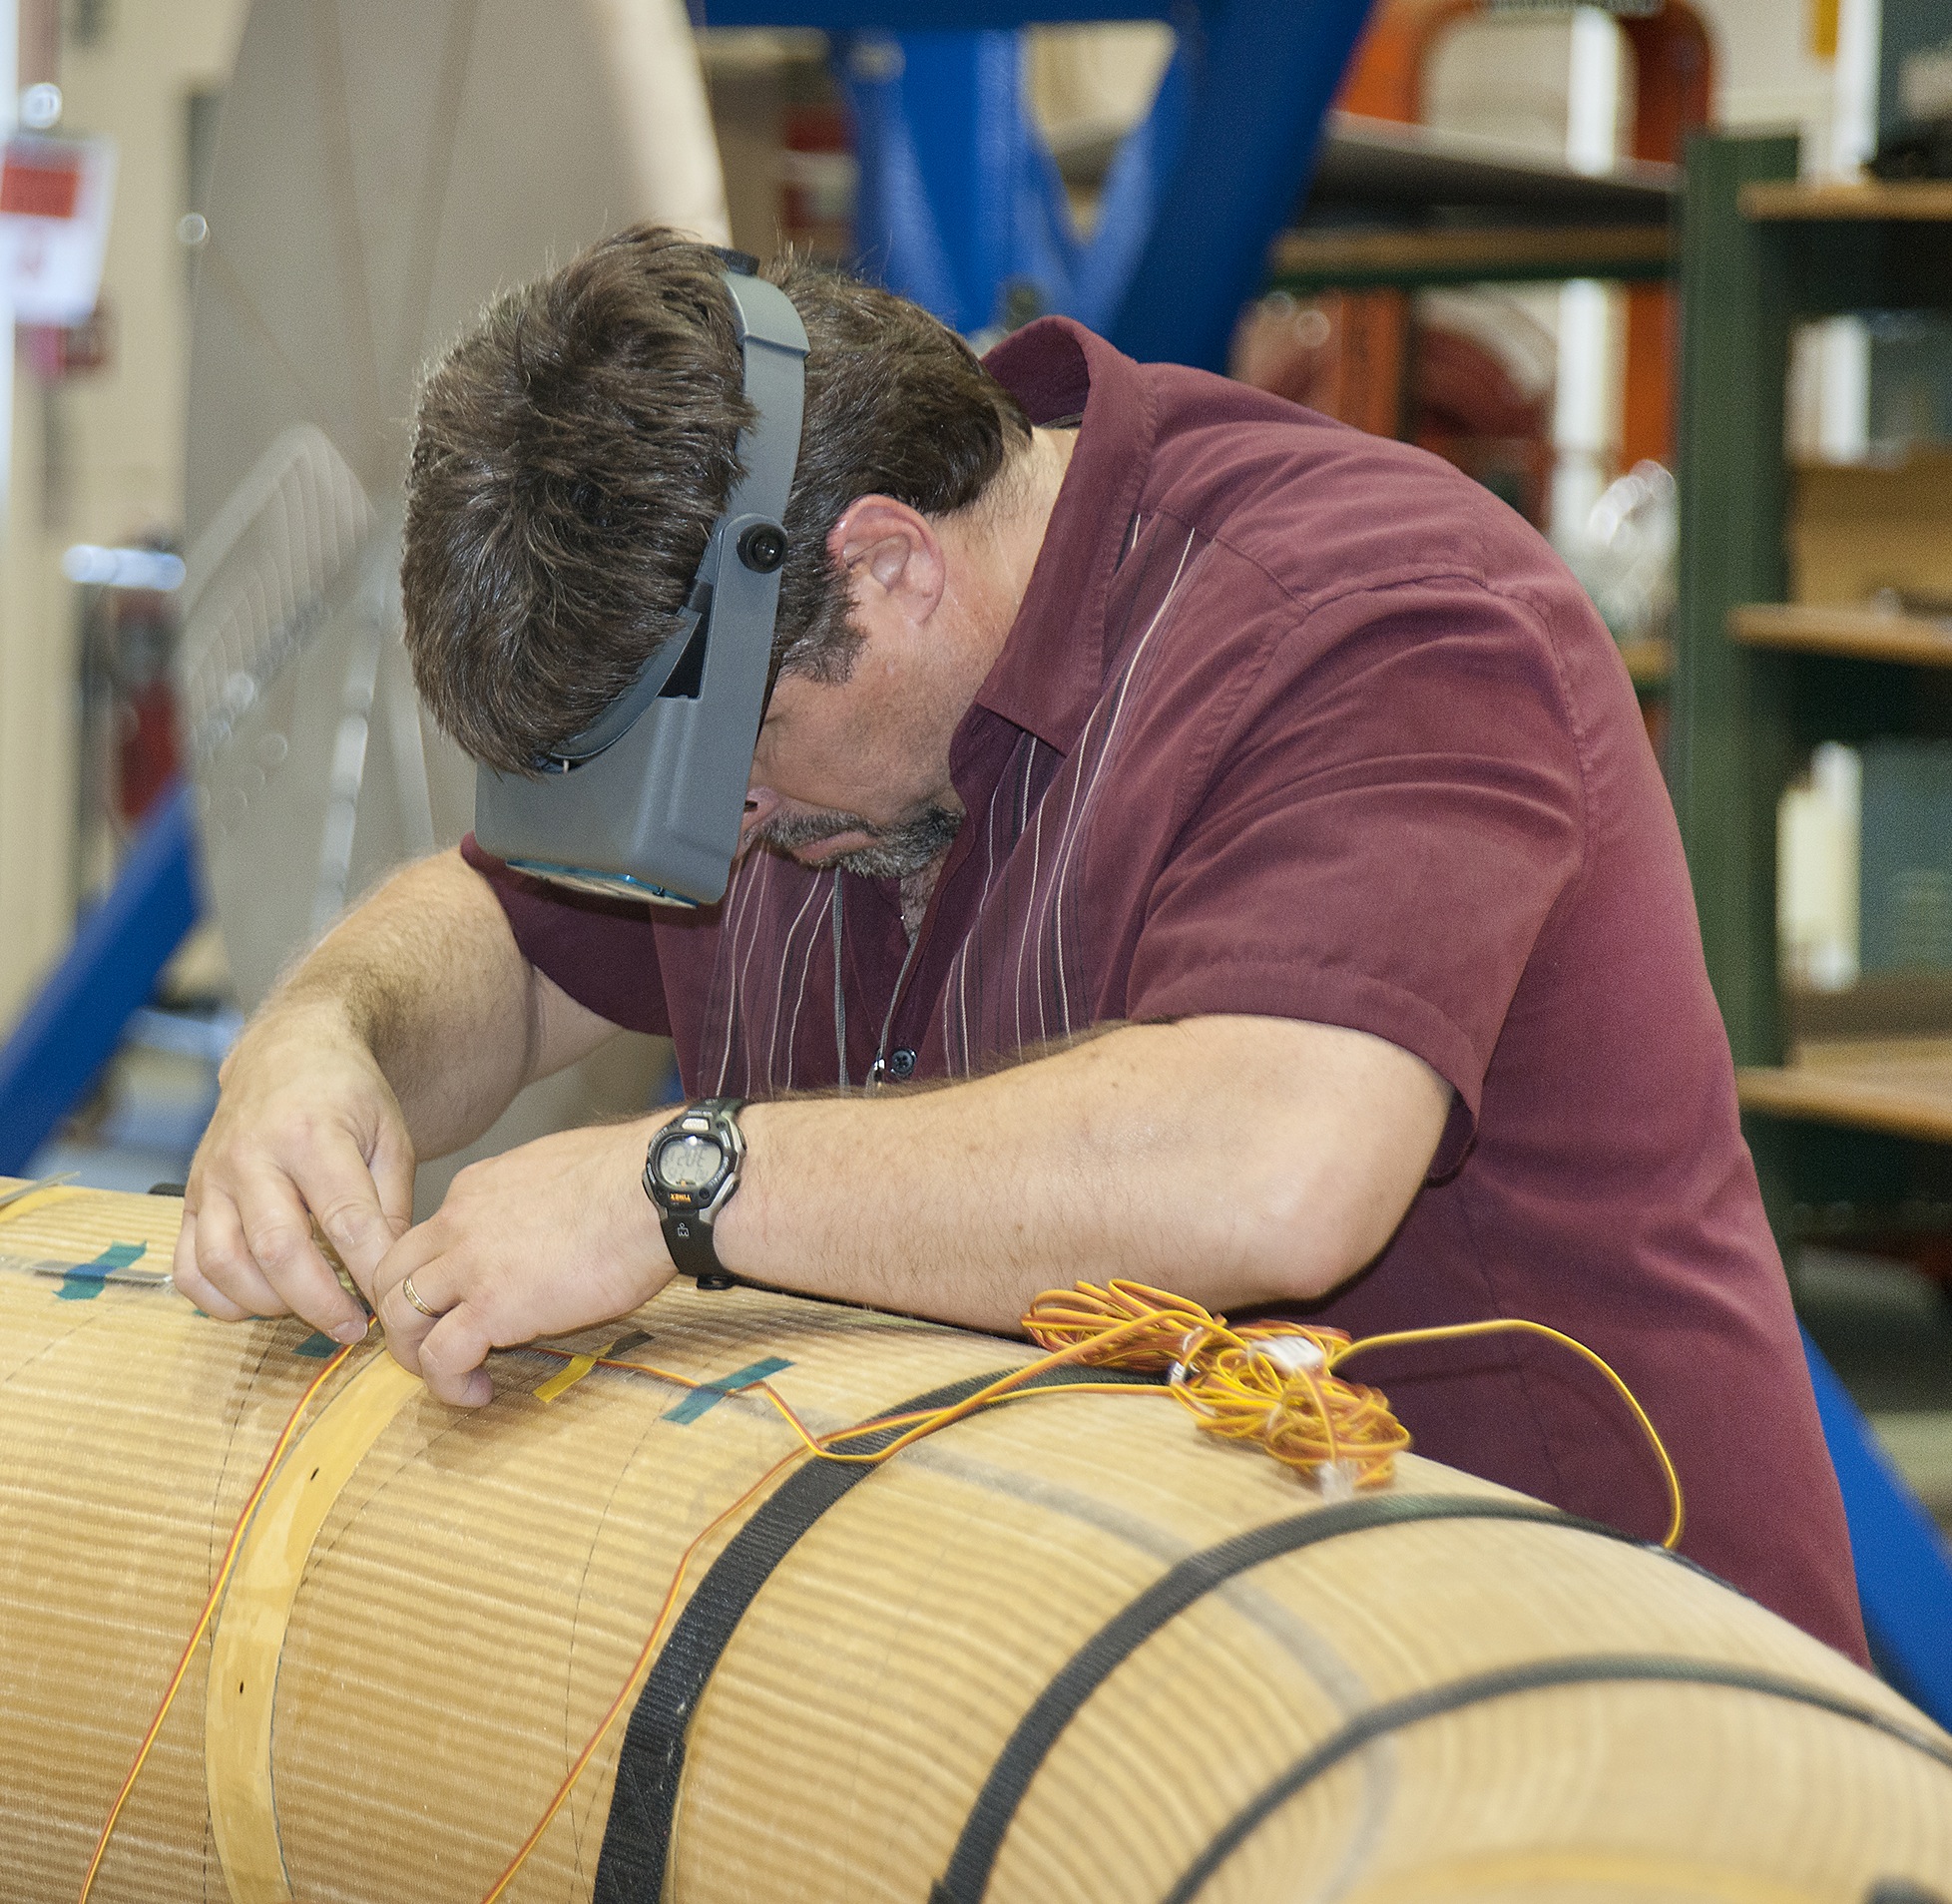 Instrumentation specialist Anthony Piazza carefully installs strain sensors on one of the Hypersonic Inflatable Aerodynamic Decelerator, or HIAD, test articles during a 2013 test series.